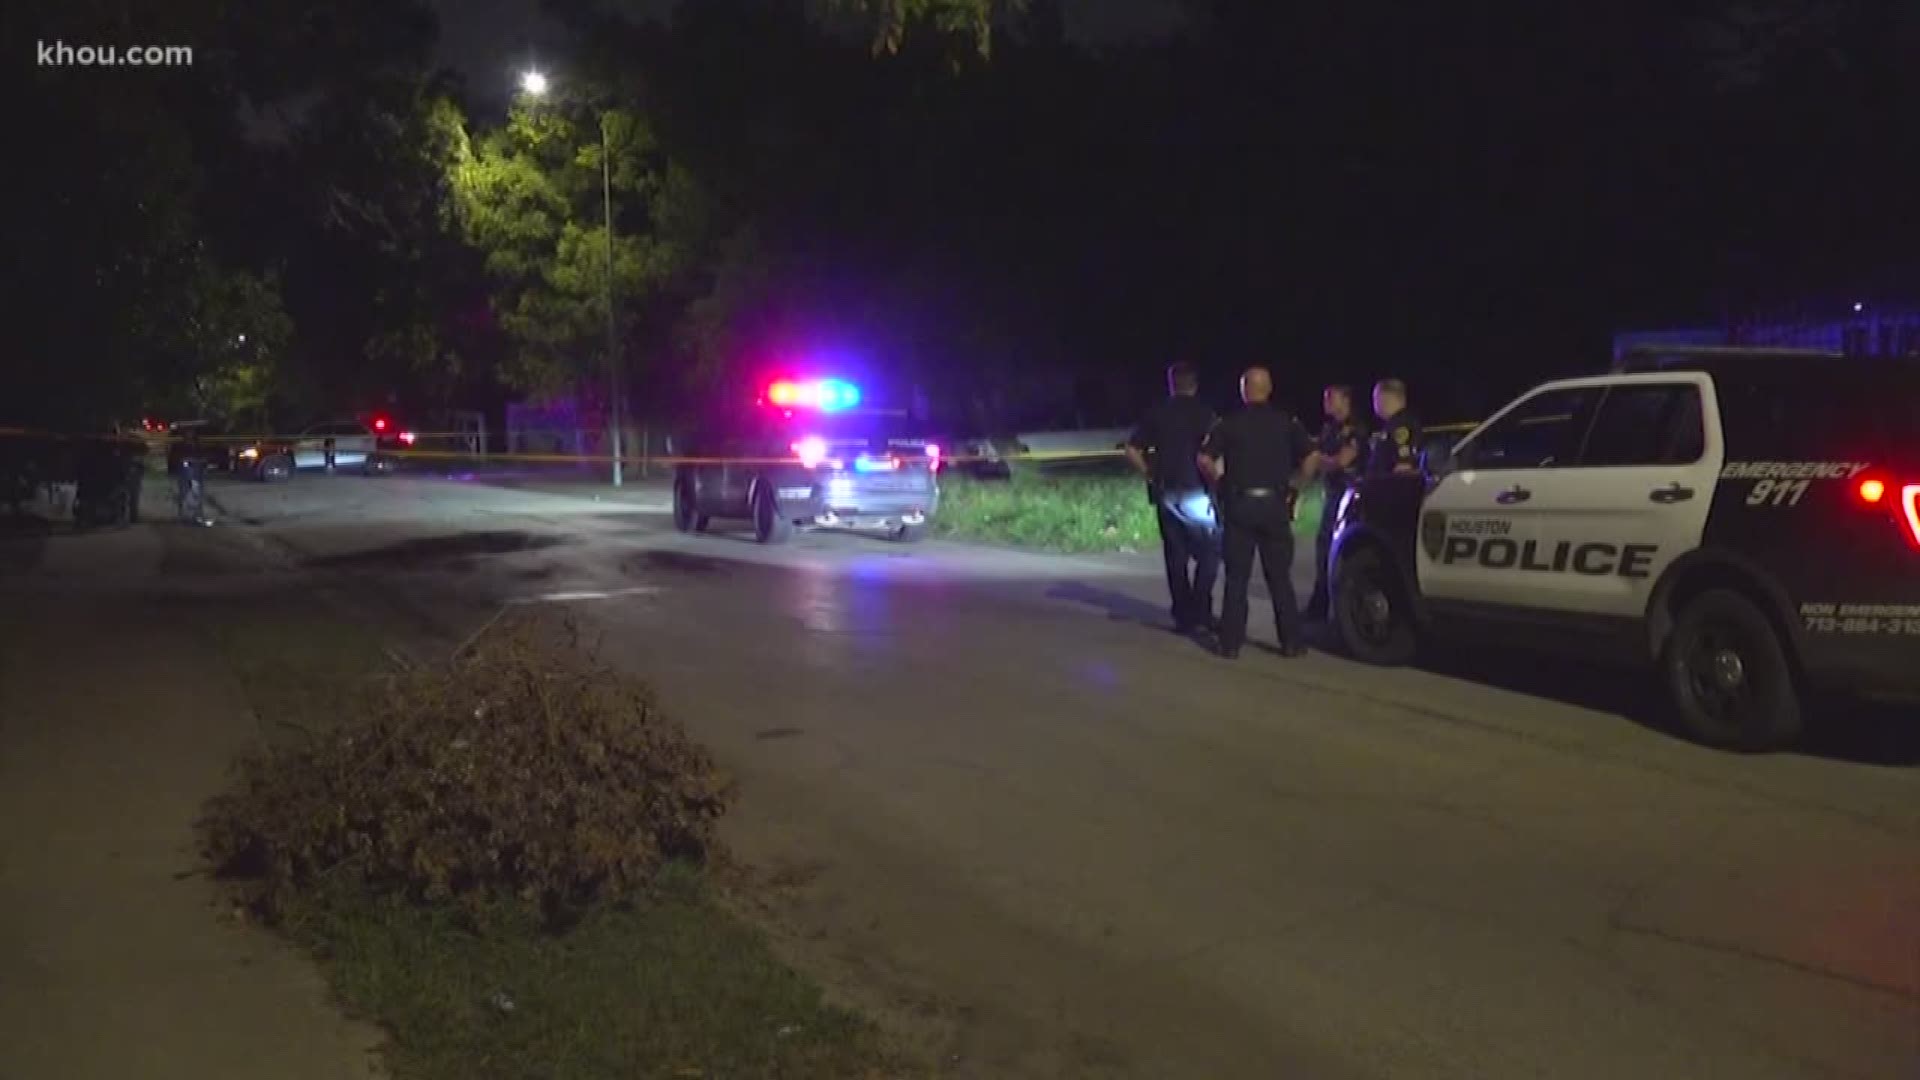 A 9-year-old boy with his mom was hit in the leg Sunday night during an apparent drive-by shooting.